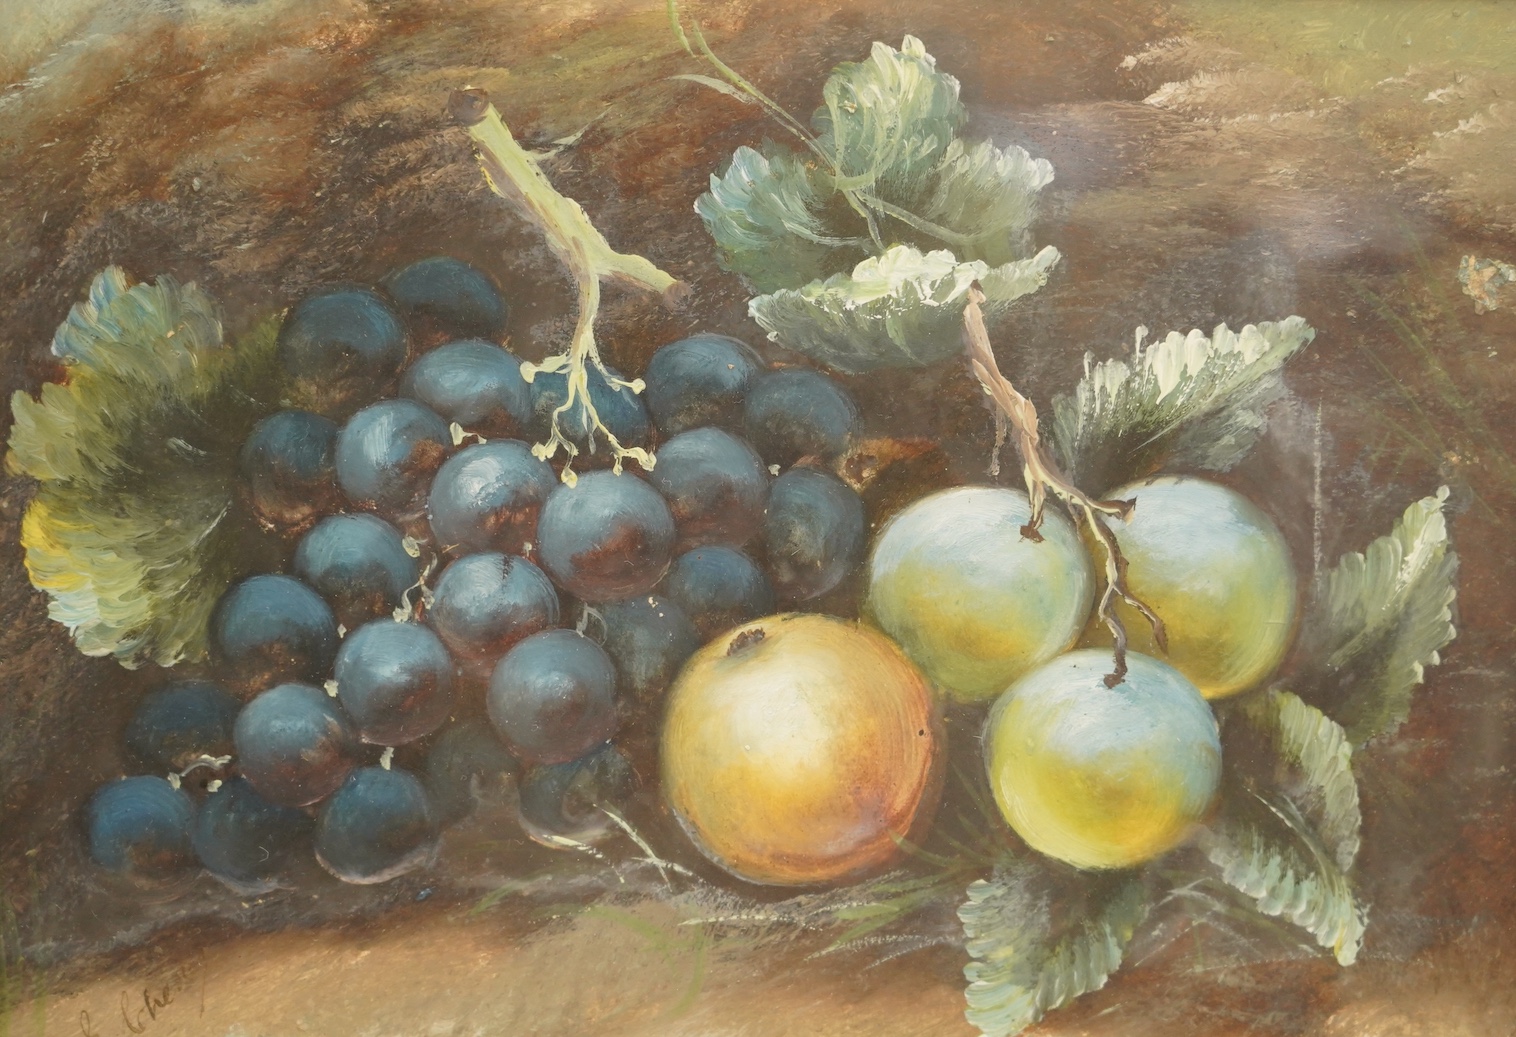 Late 19th / early 20th century English School, pair of watercolours, Still lifes of fruit, each indistinctly signed lower left, 23 x 32cm. Condition - fair